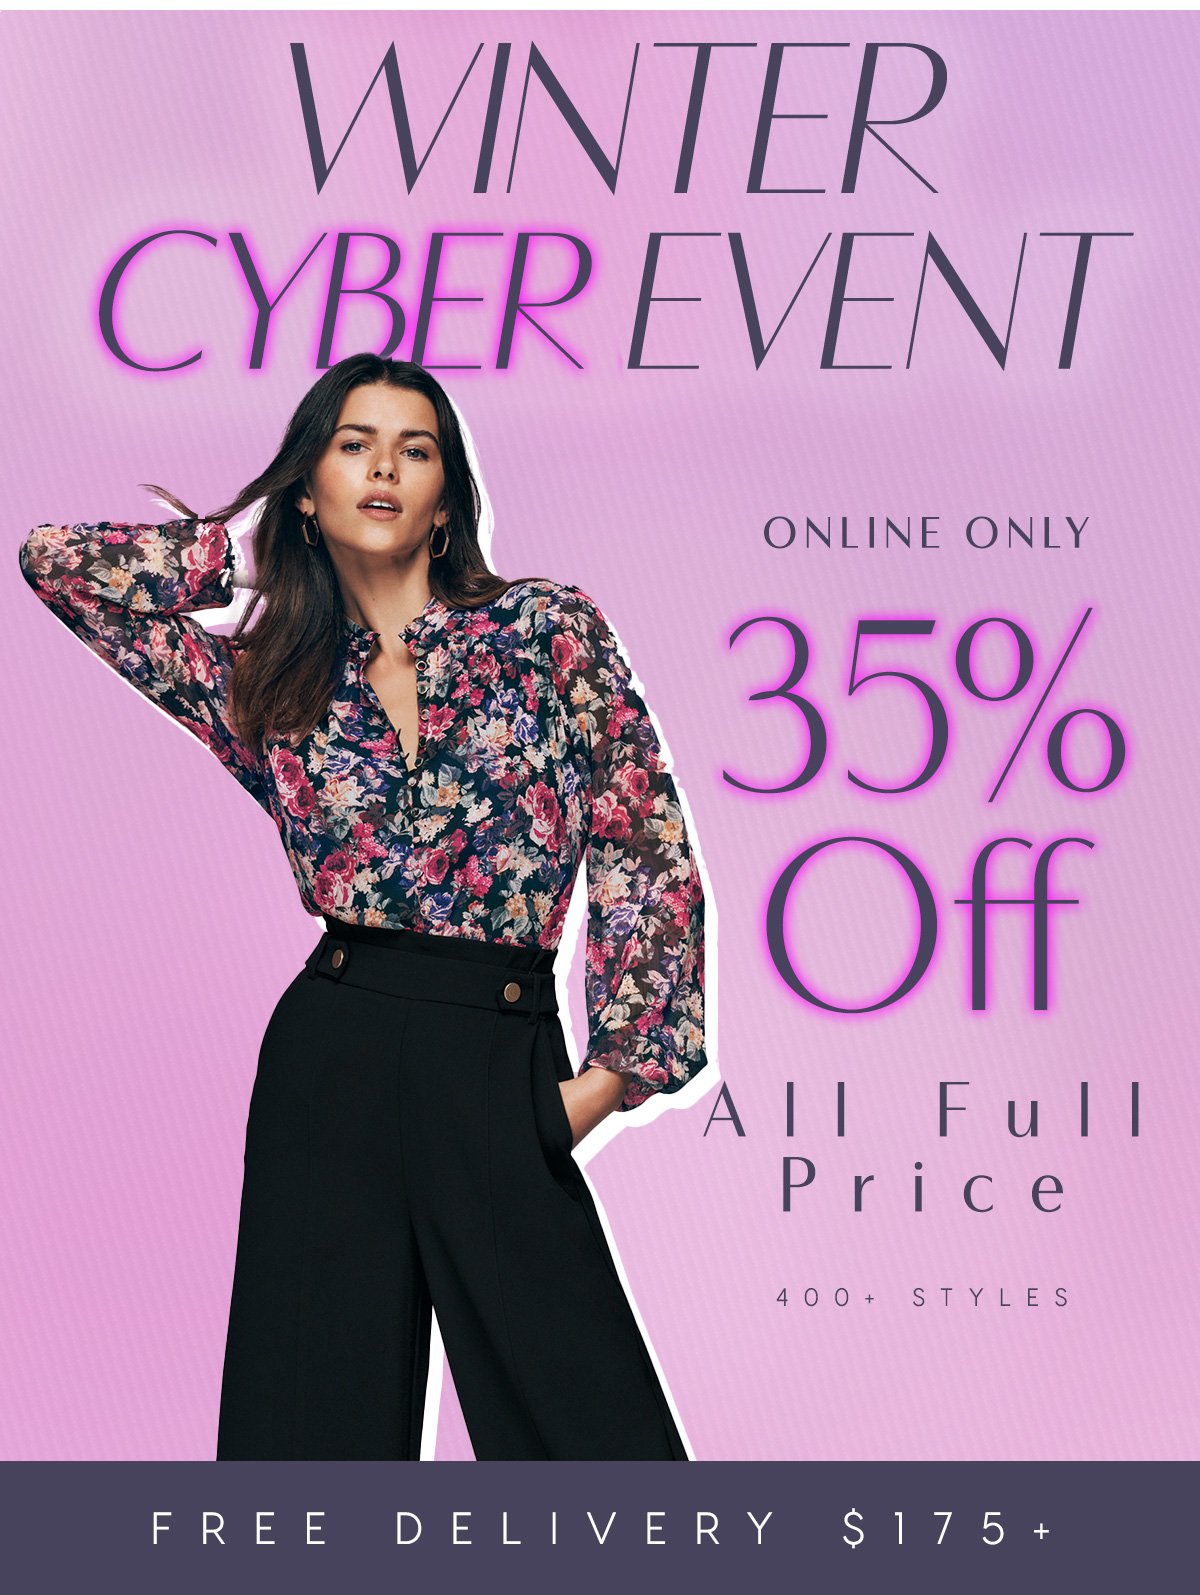 Winter Cyber Event, Only Online, 35 Off All Full Price Items, Free Delivery over $175